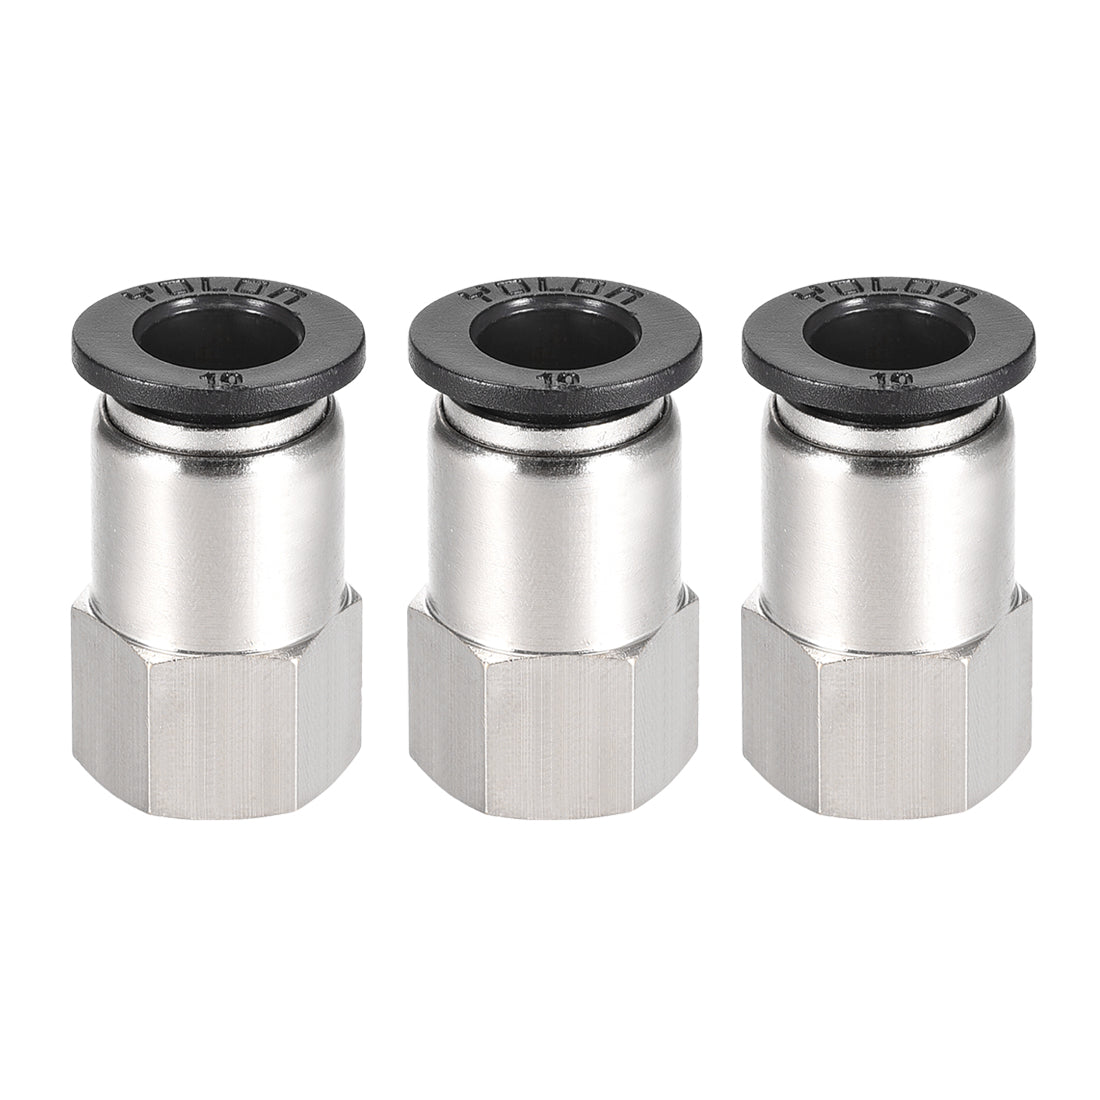 uxcell Uxcell Push to Connect Tube Fitting Adapter 10mm Tube OD x 1/4 BSPT Female Straight Pneumatic Connecter Pipe Fitting 3pcs